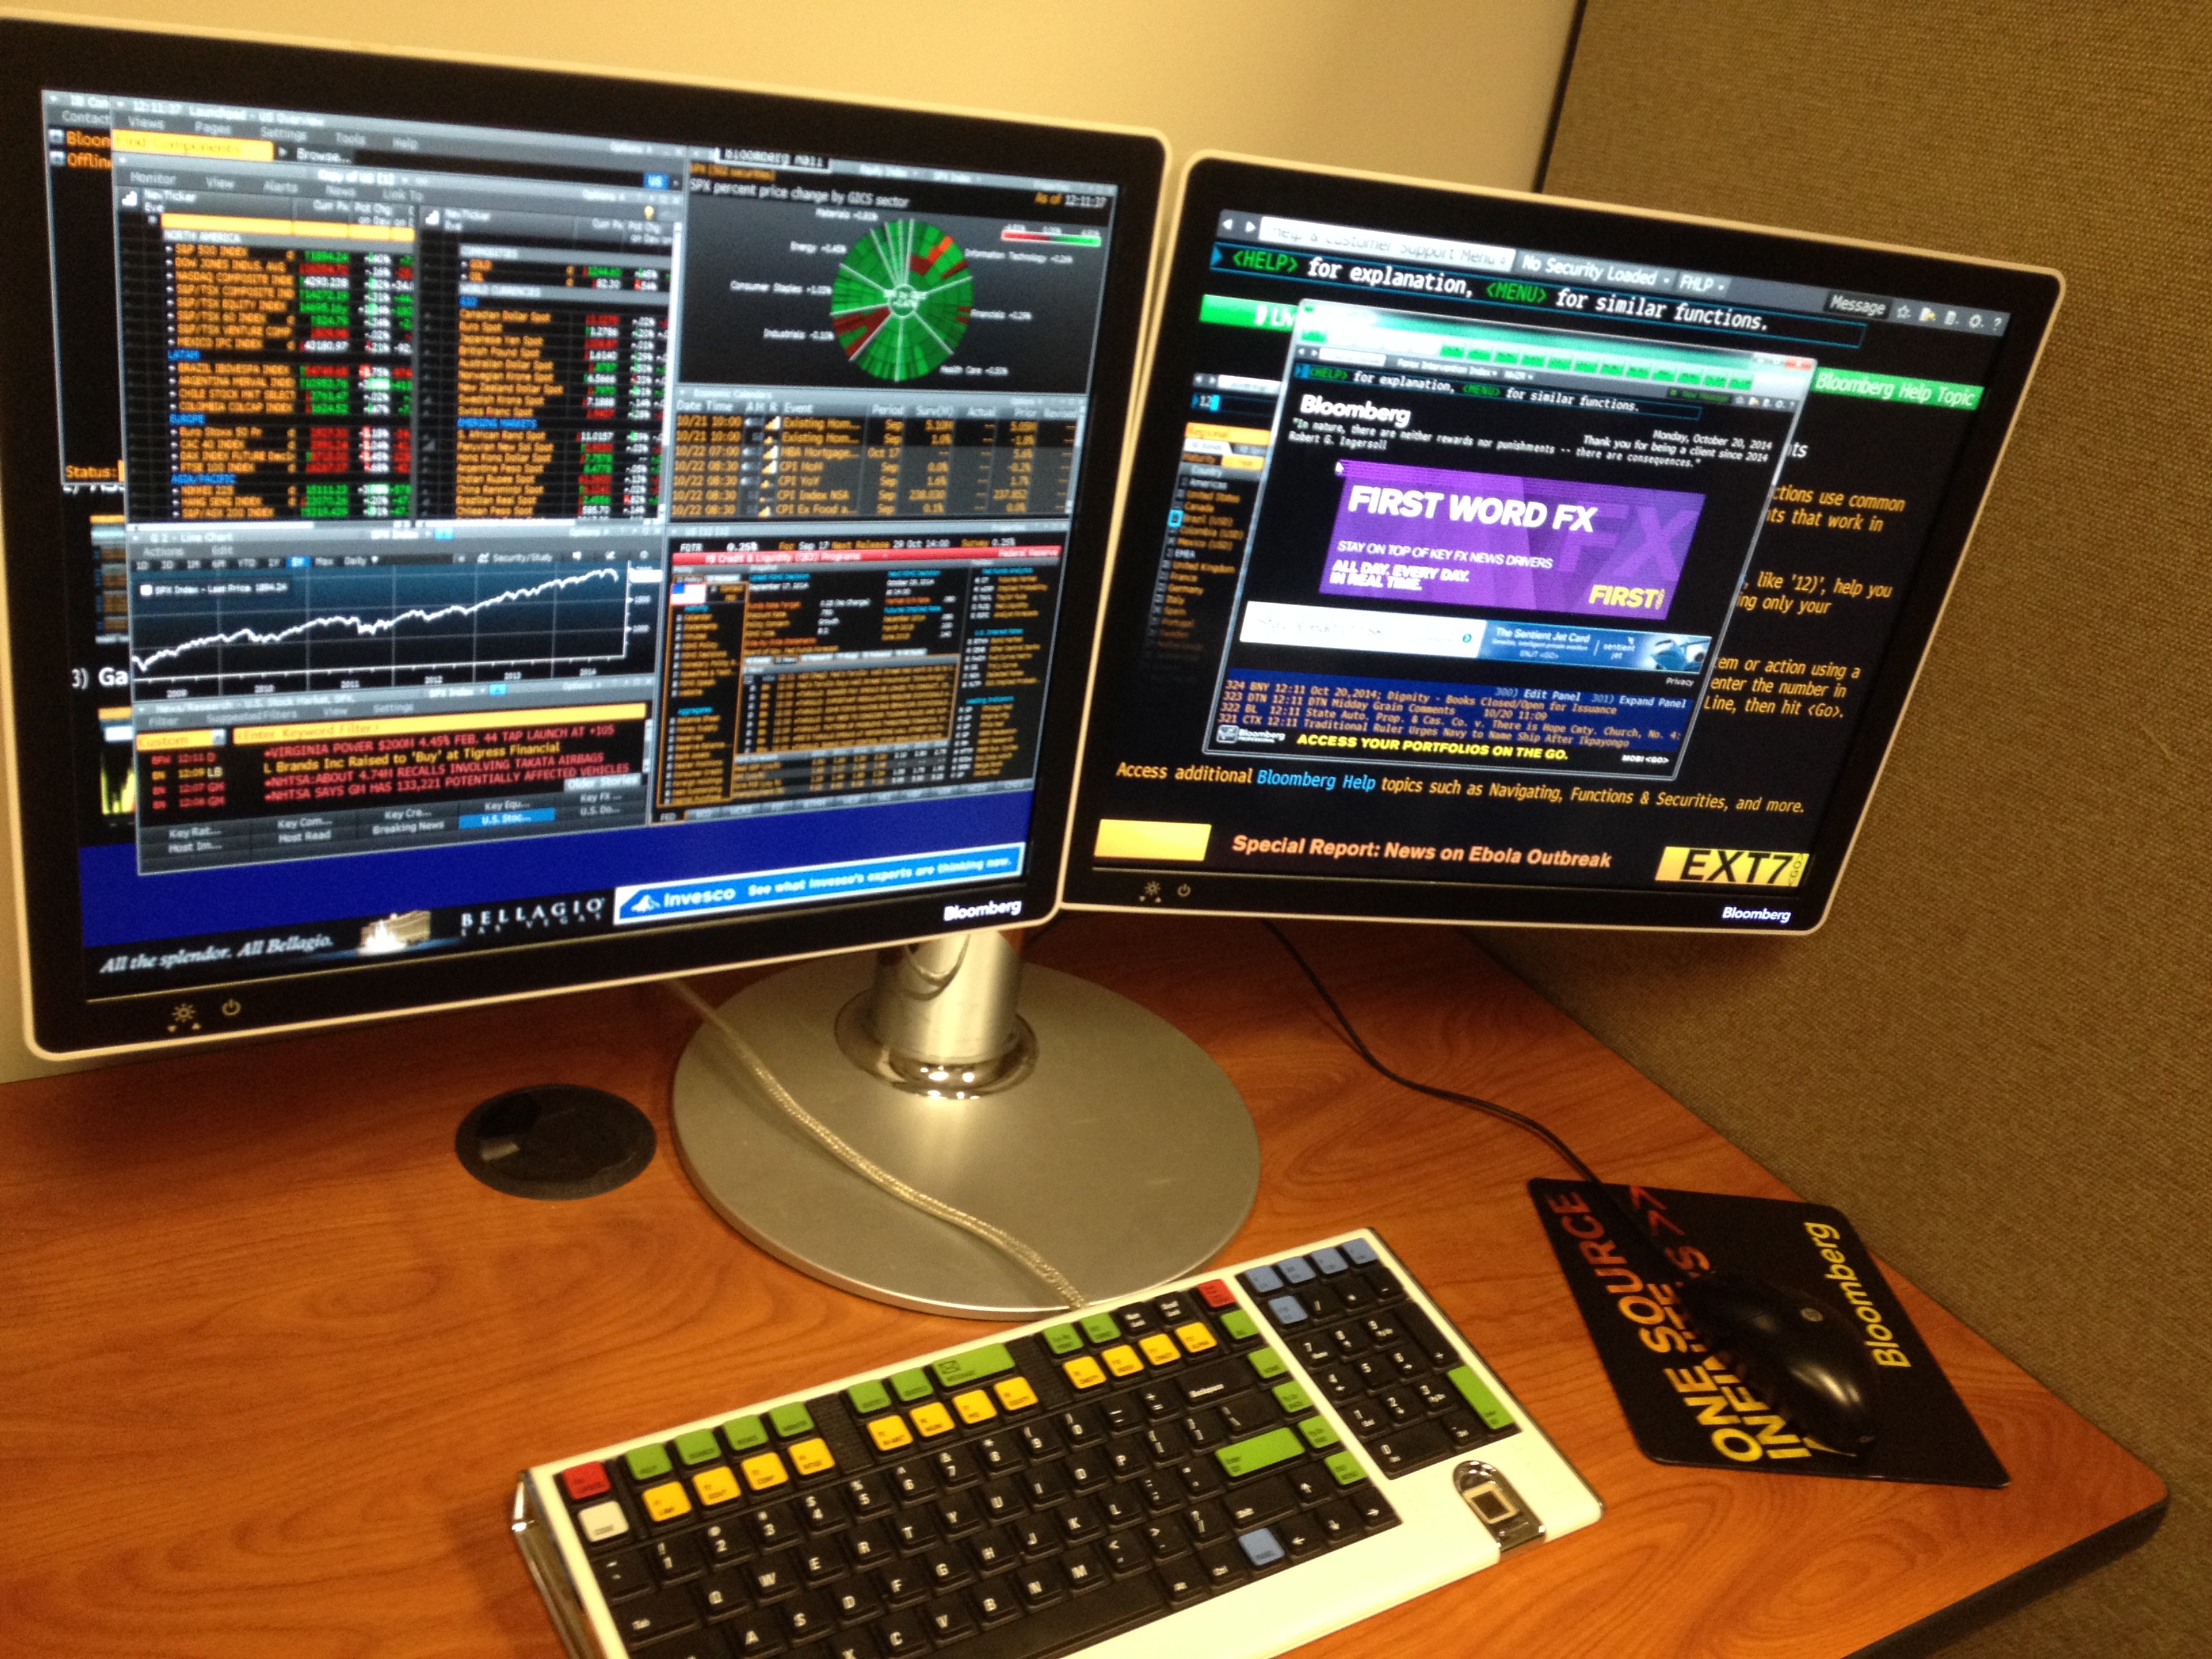 bloomberg terminal images